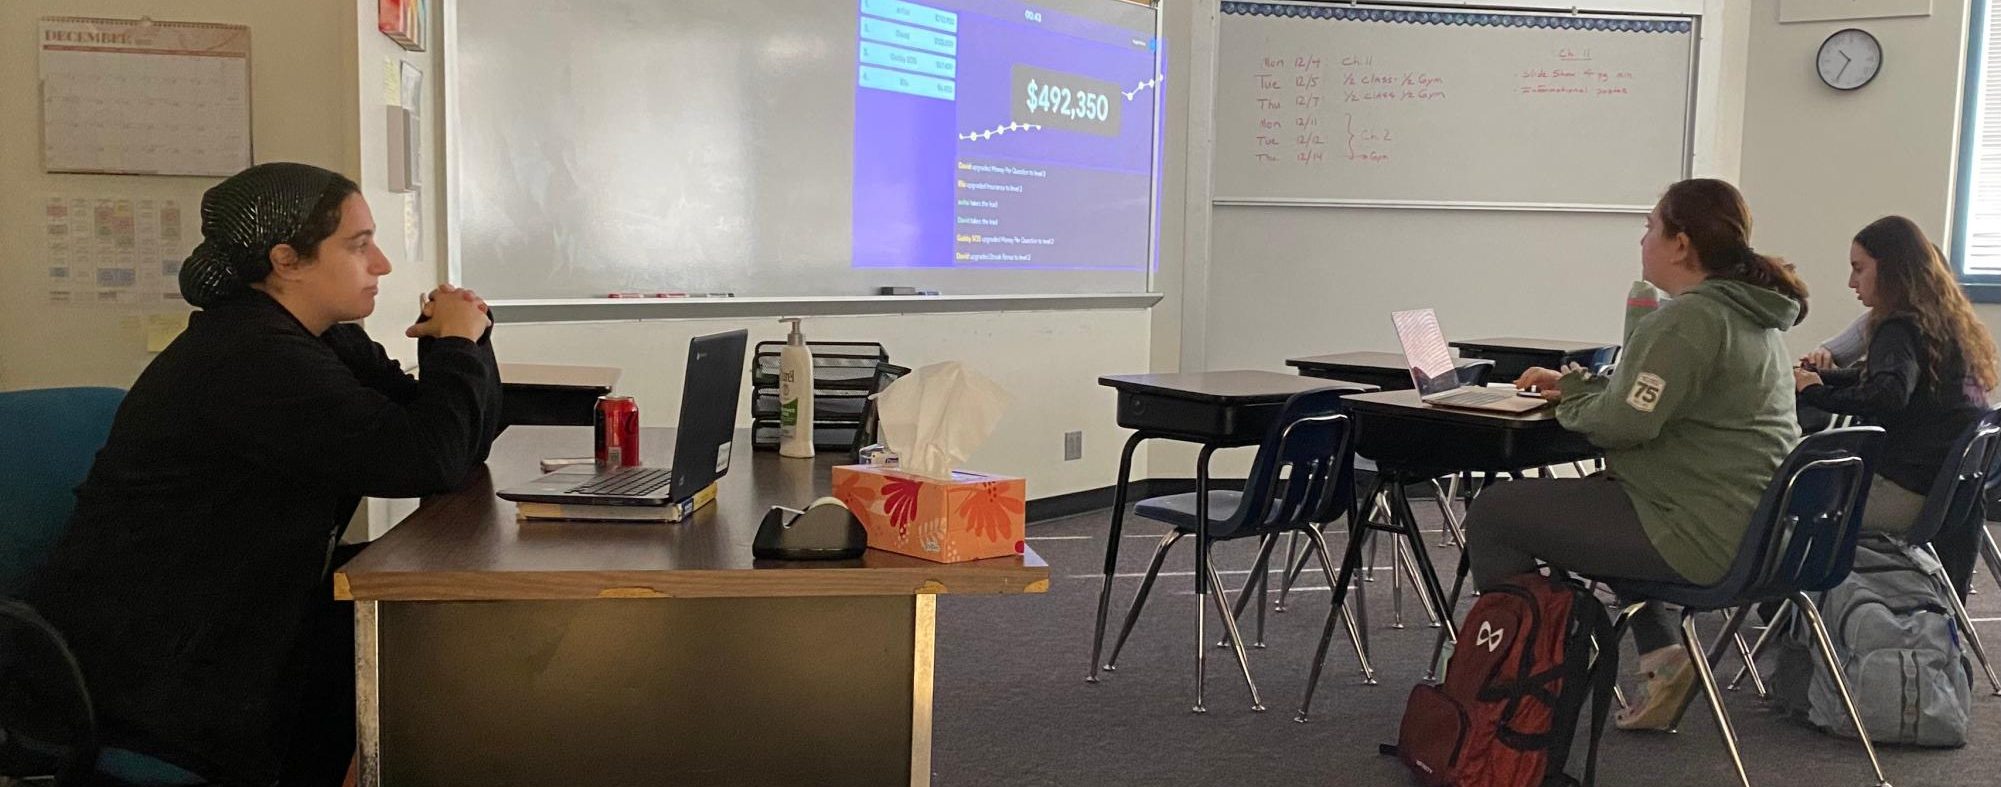 Transforming Your Substitute Teaching Experience with Kahoot!